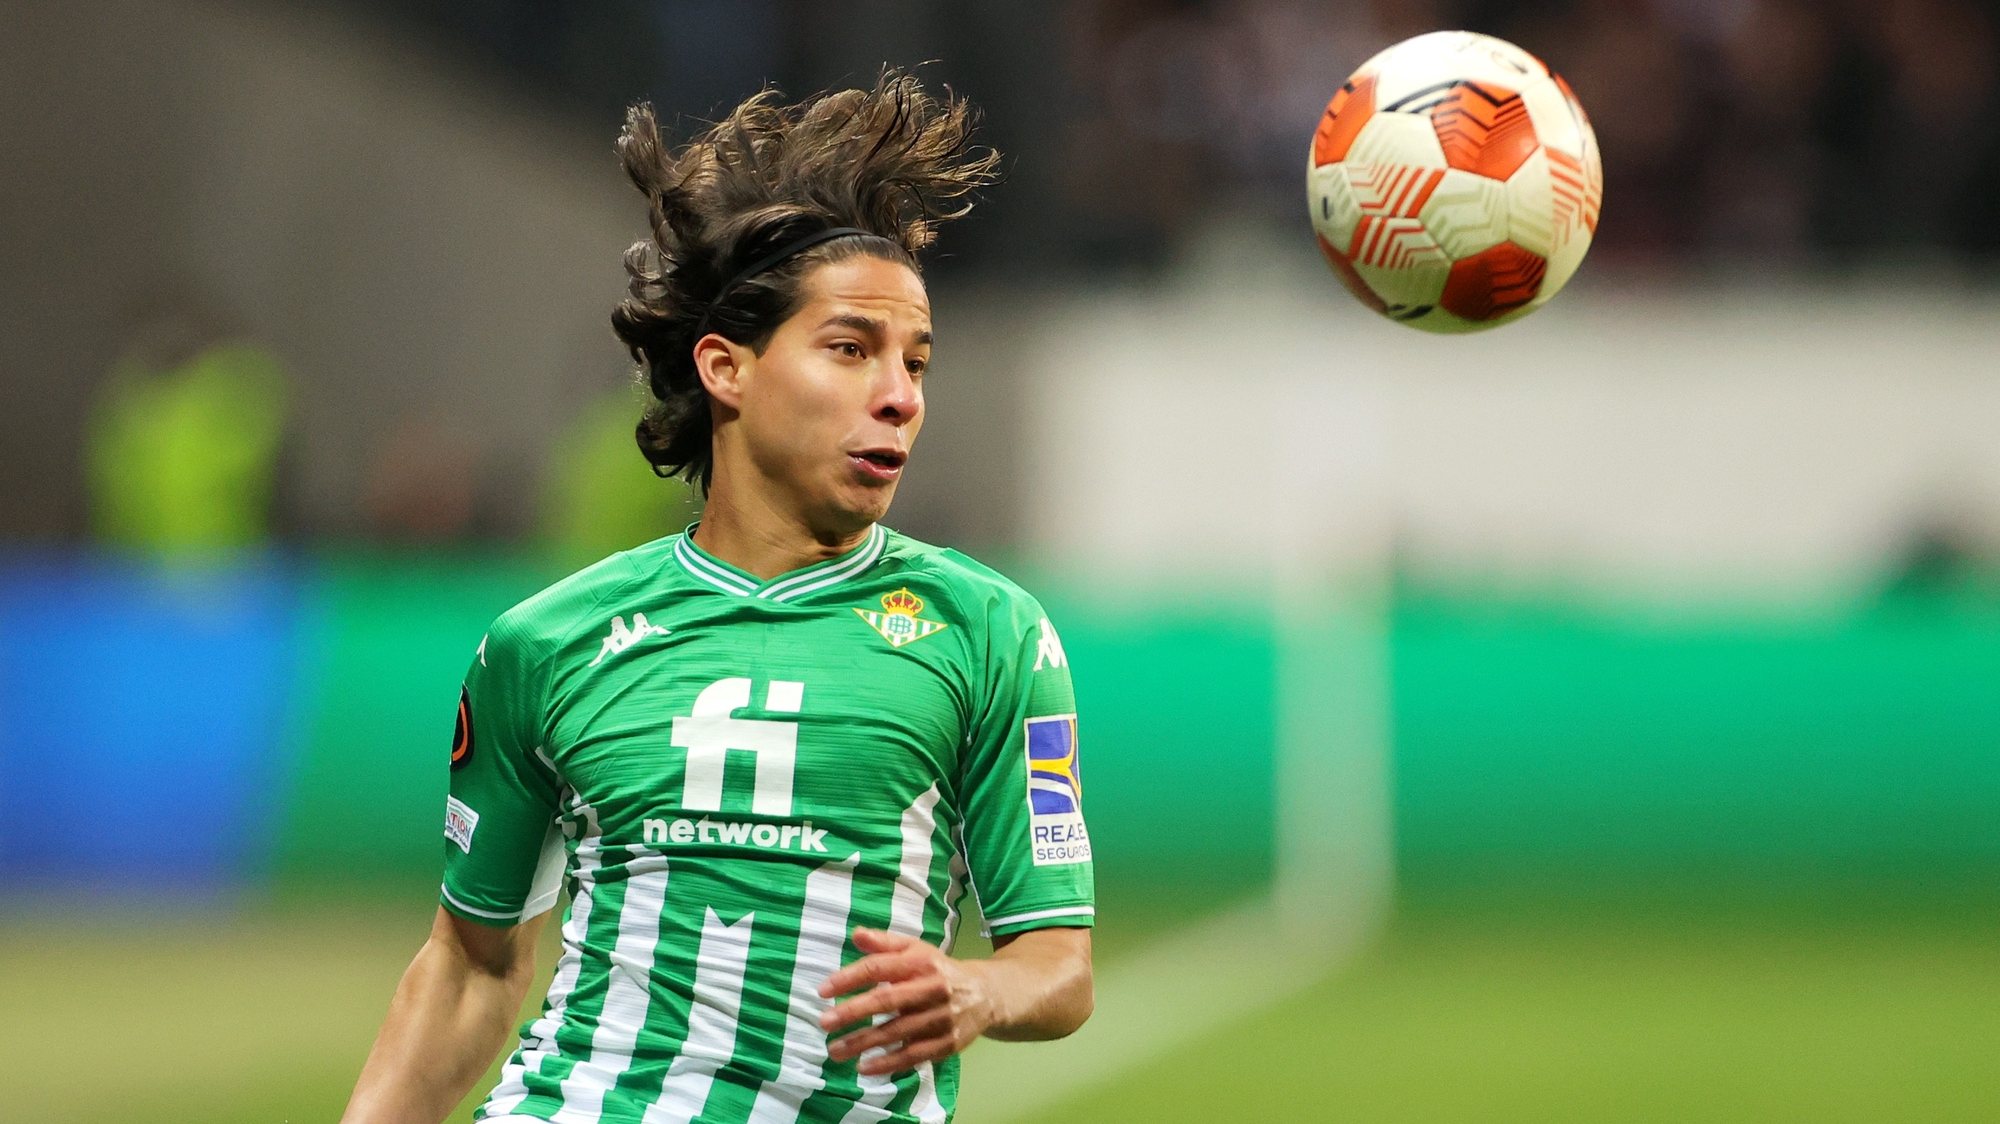 epa09832379 Diego Lainez of Betis in action during the UEFA Europa League round of 16, second leg soccer match between Eintracht Frankfurt and Real Betis in Frankfurt am Main, Germany, 17 March 2022.  EPA/FRIEDEMANN VOGEL